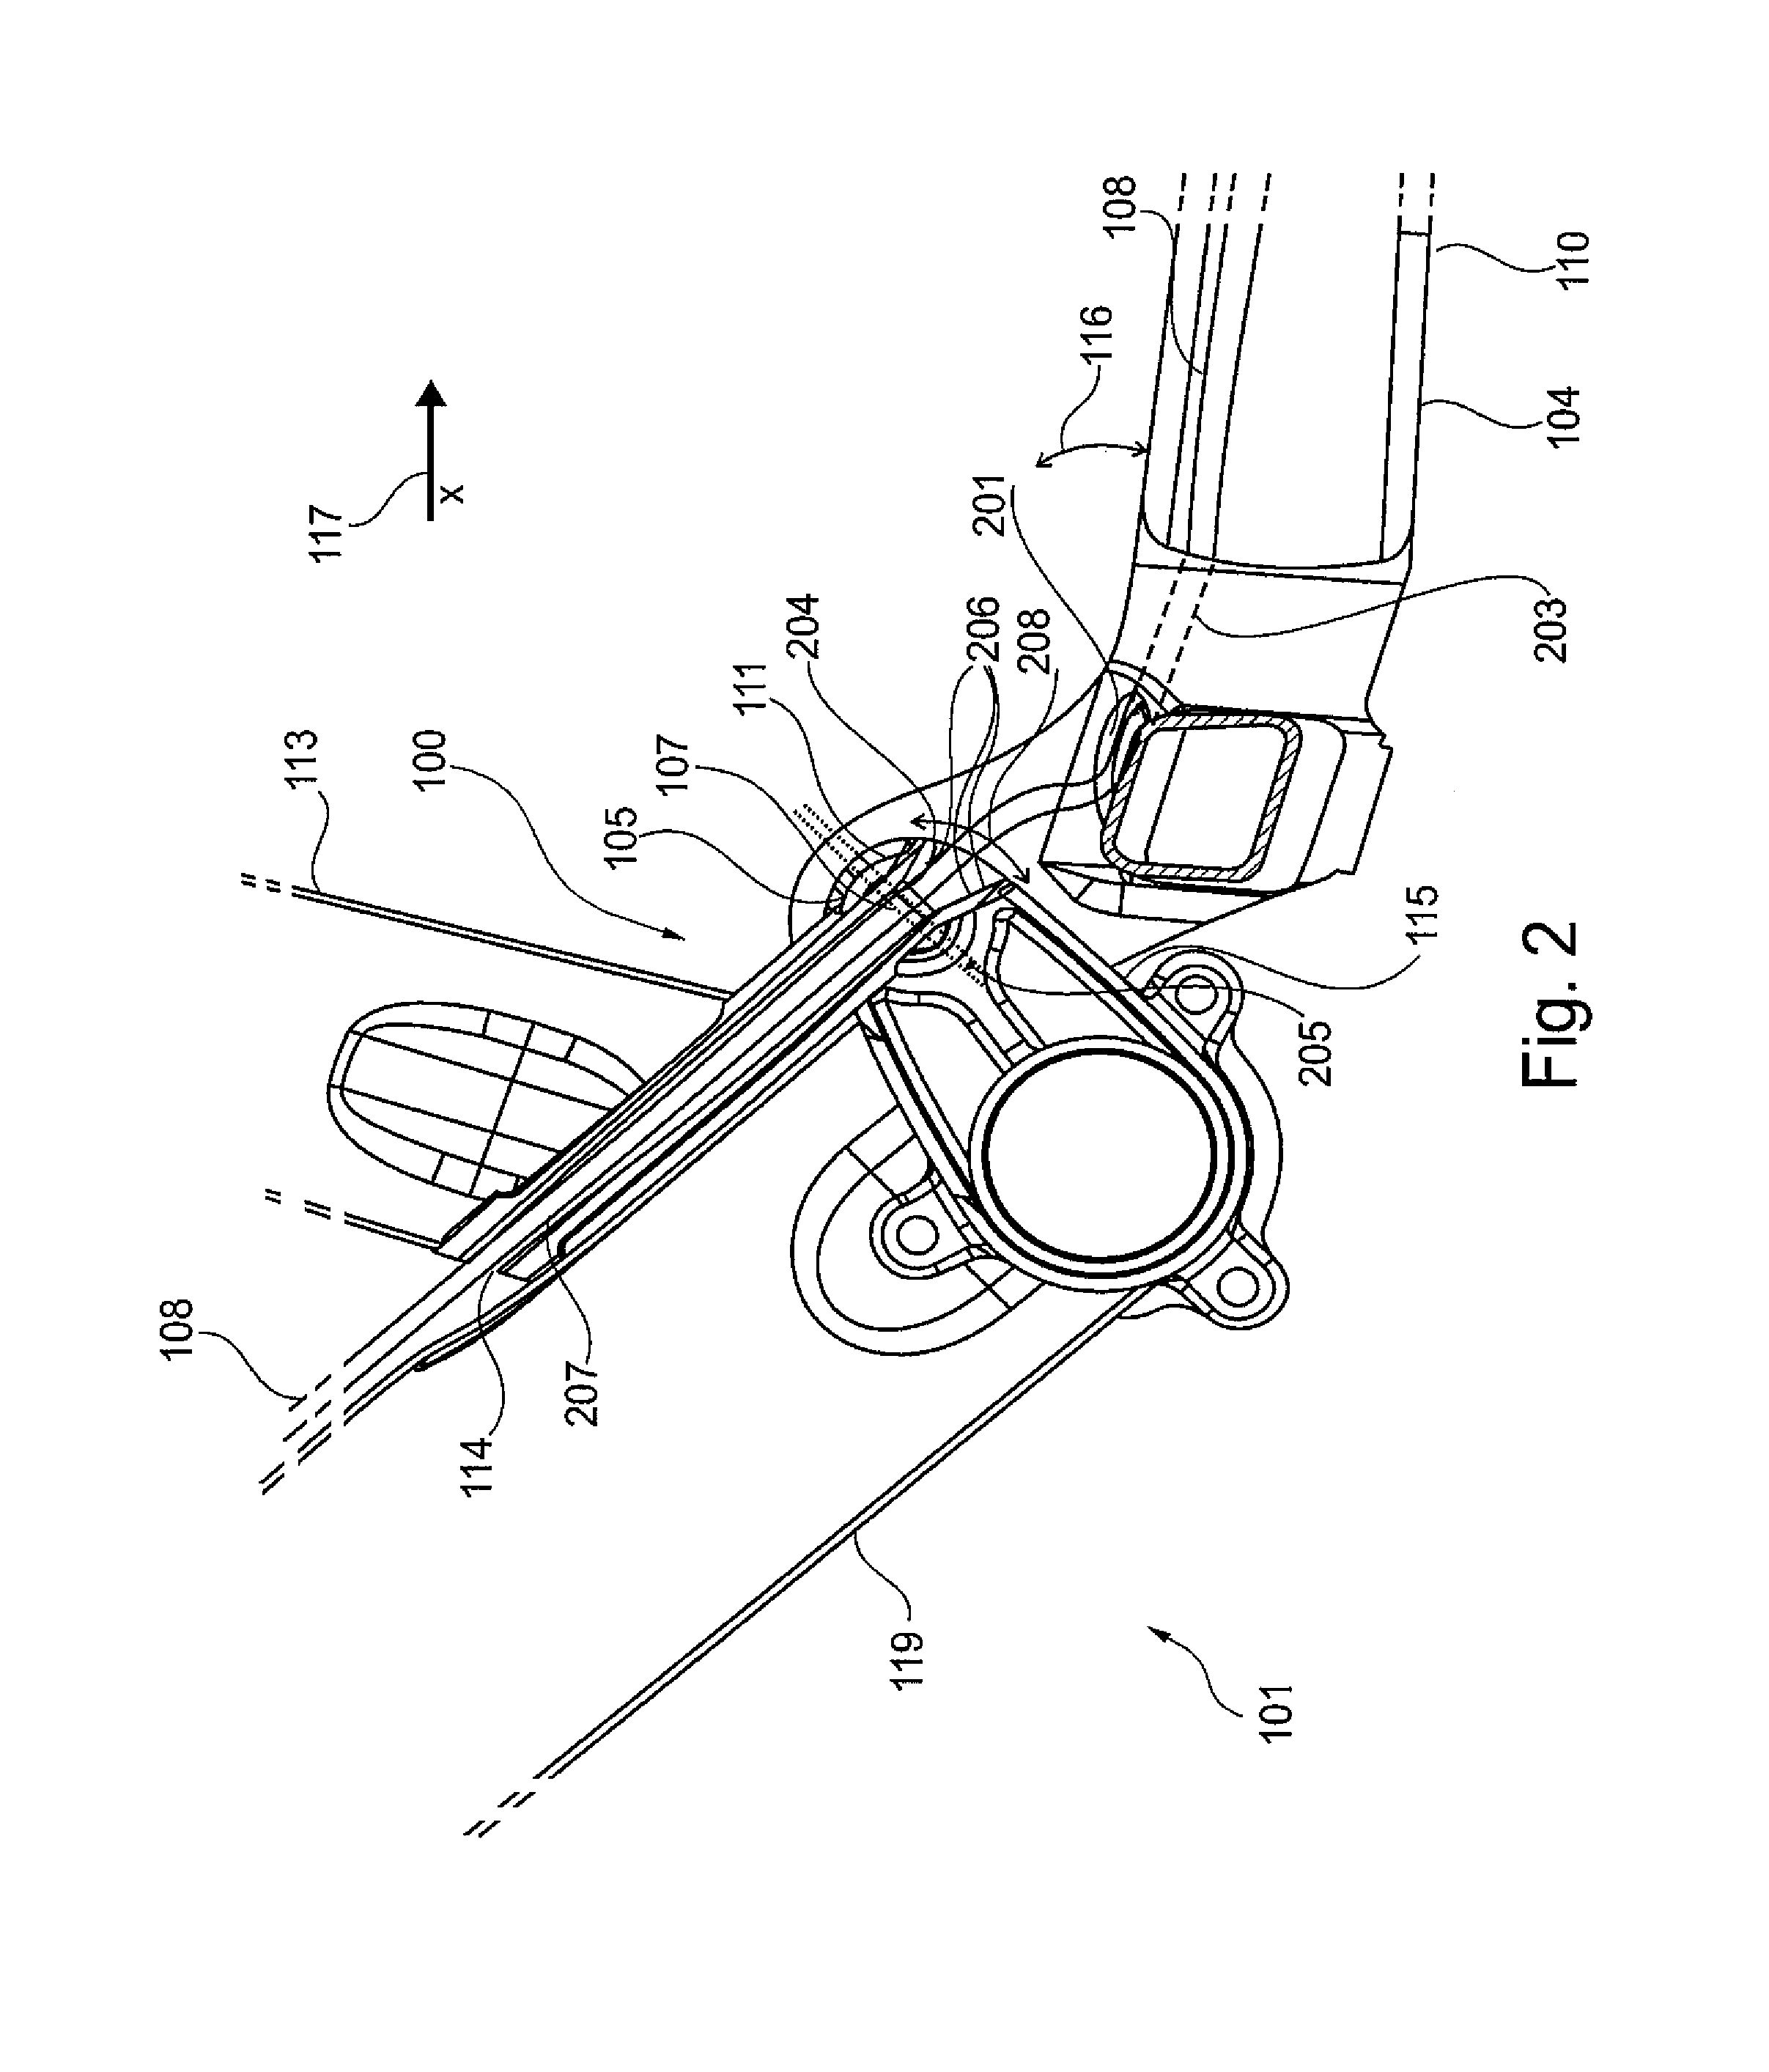 Frame element of a suspension-mounted two-wheeled vehicle frame for guiding a cable